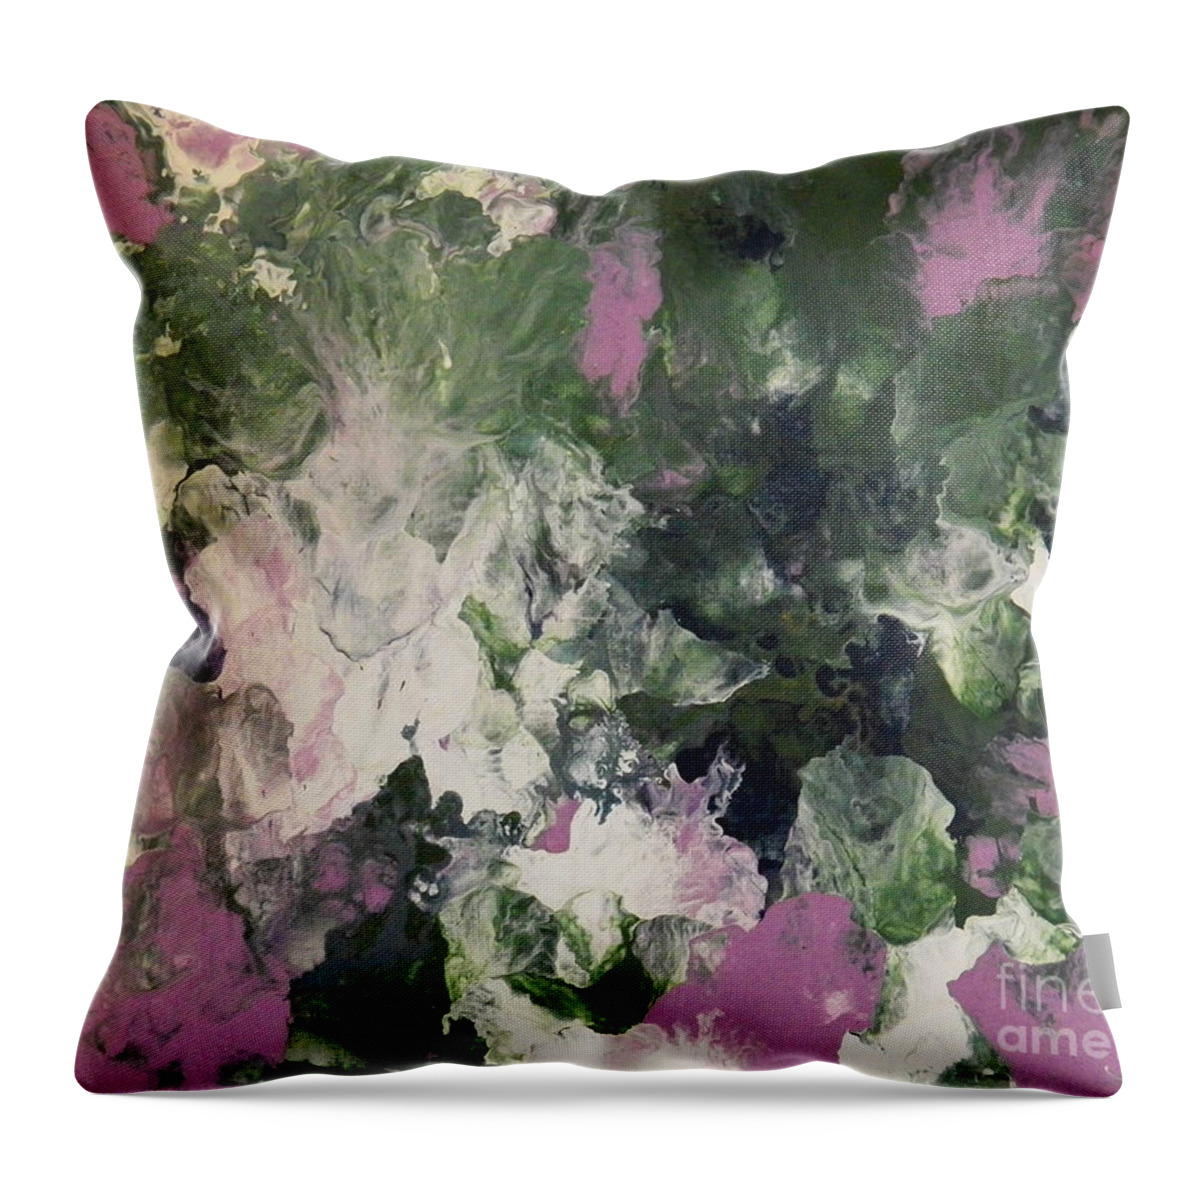 Abstract Throw Pillow featuring the painting Pixie Flowers by Corinne Elizabeth Cowherd